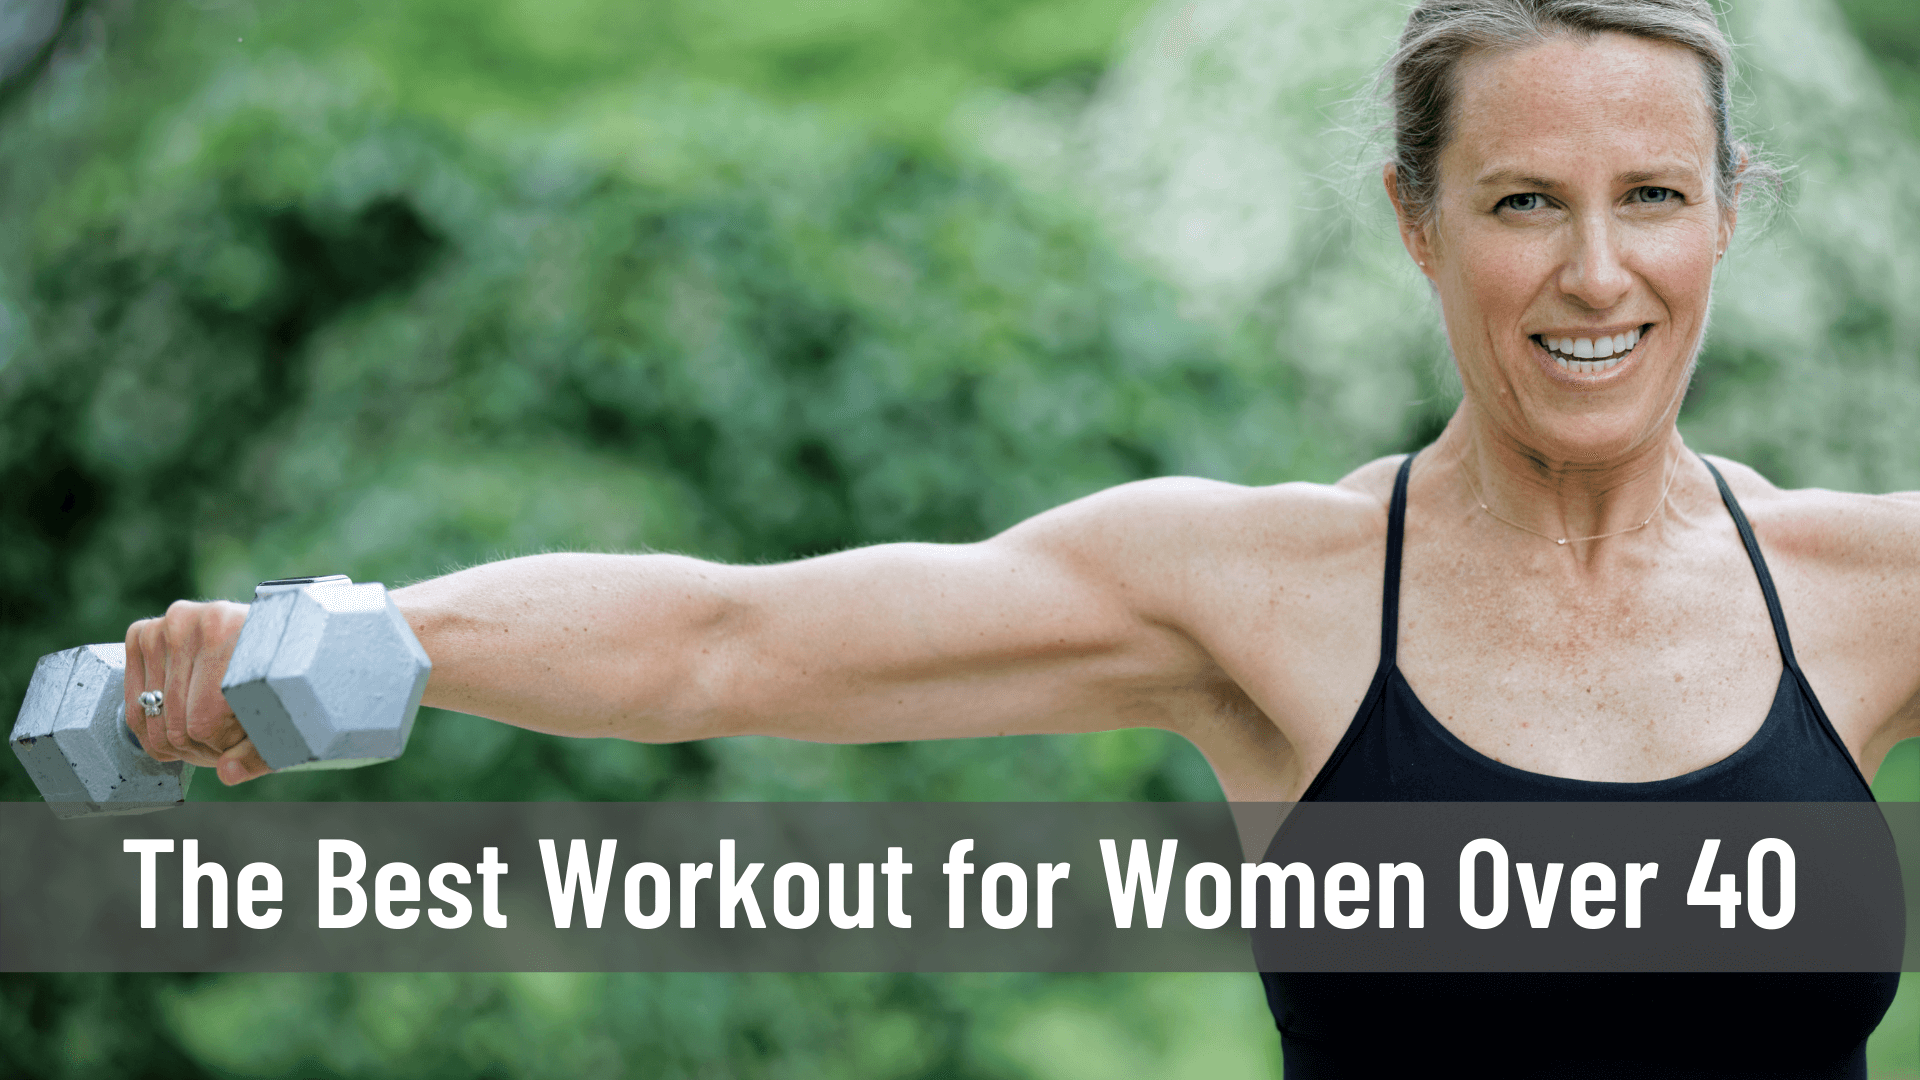 The Best Workout for Women Over 40